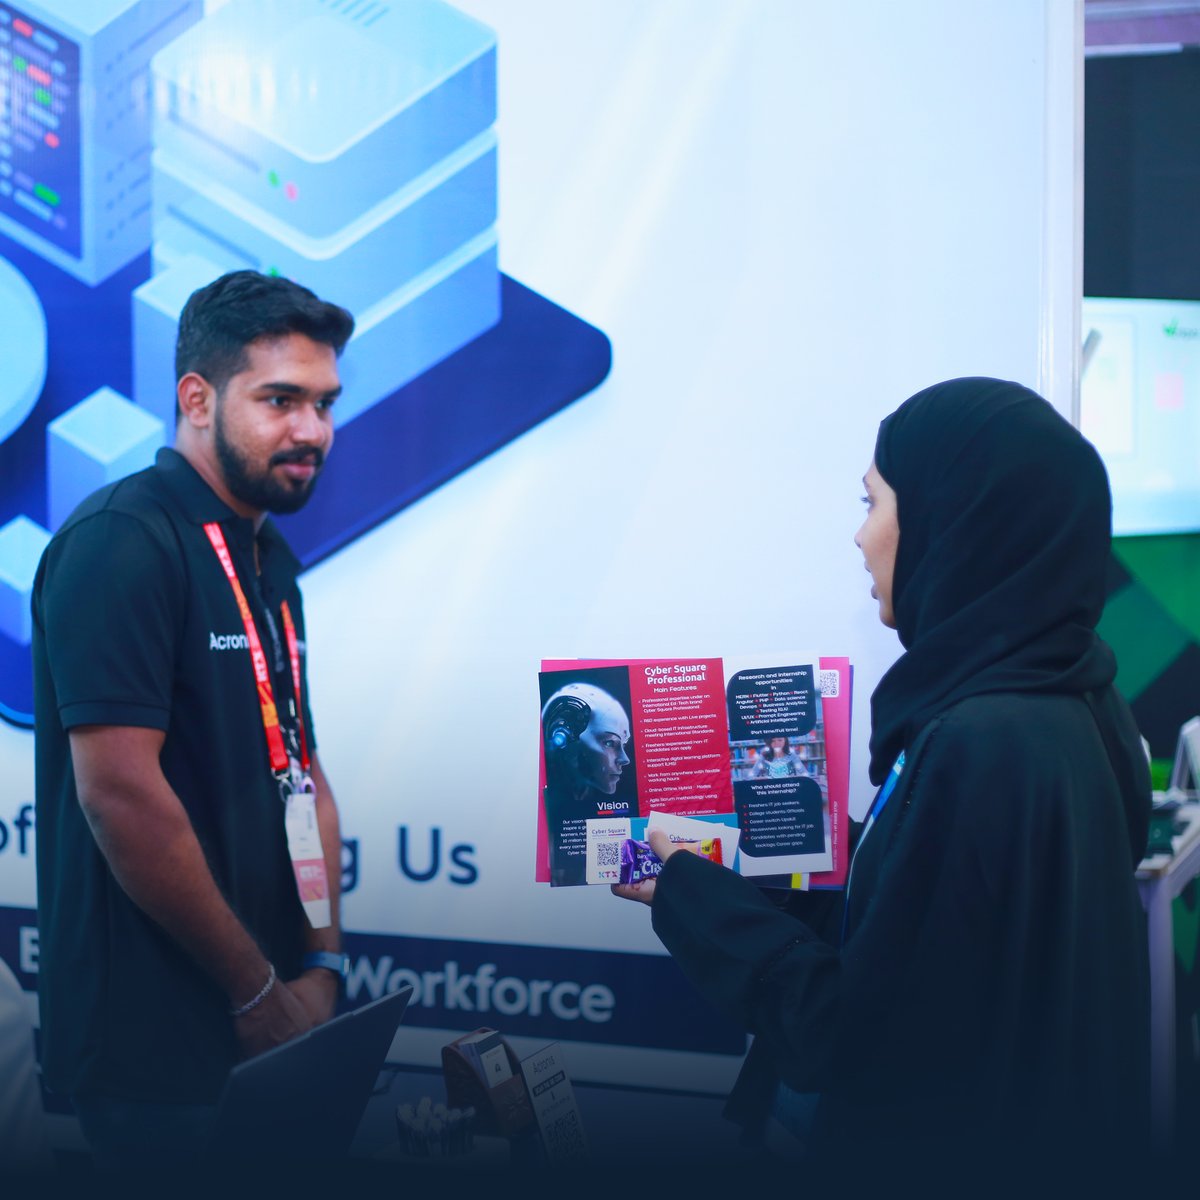 Catch a glimpse of our cyber security stall @KTX, powered by Acronis!

We are grateful for the collaboration and support received from Acronis, without which our KTX journey would've been incomplete.